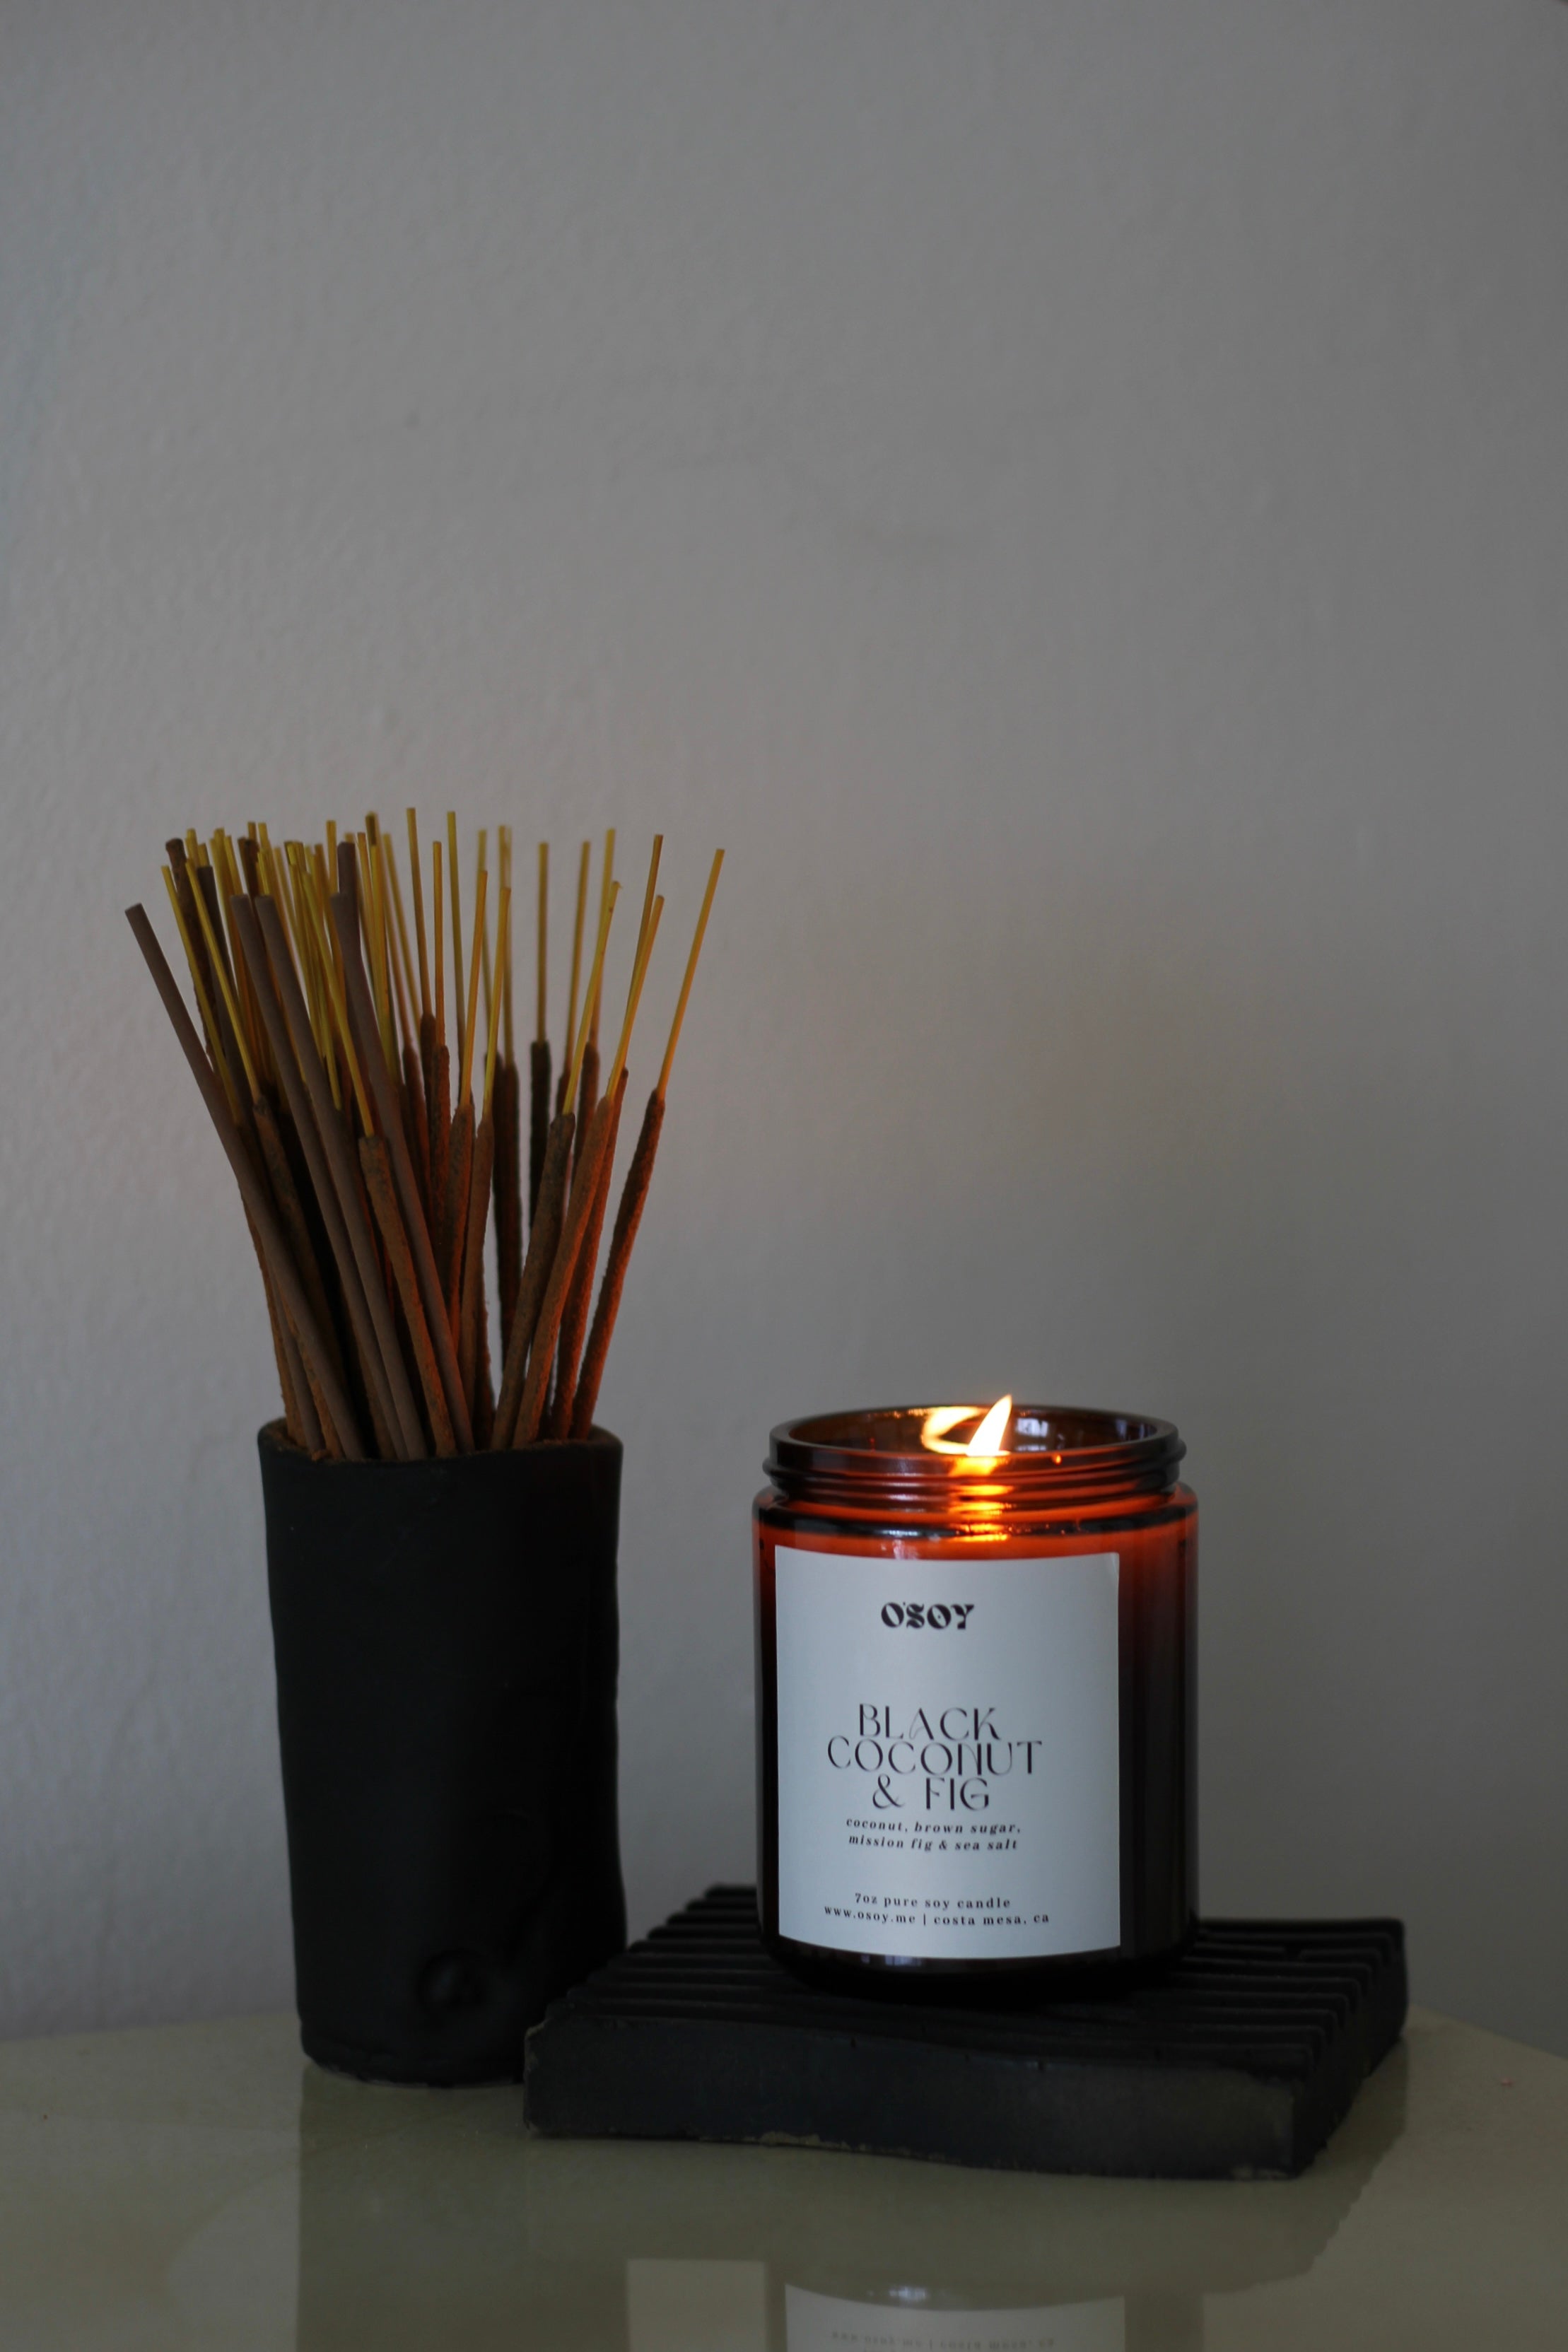 Black Coconut & Fig- 7oz Soy Candle